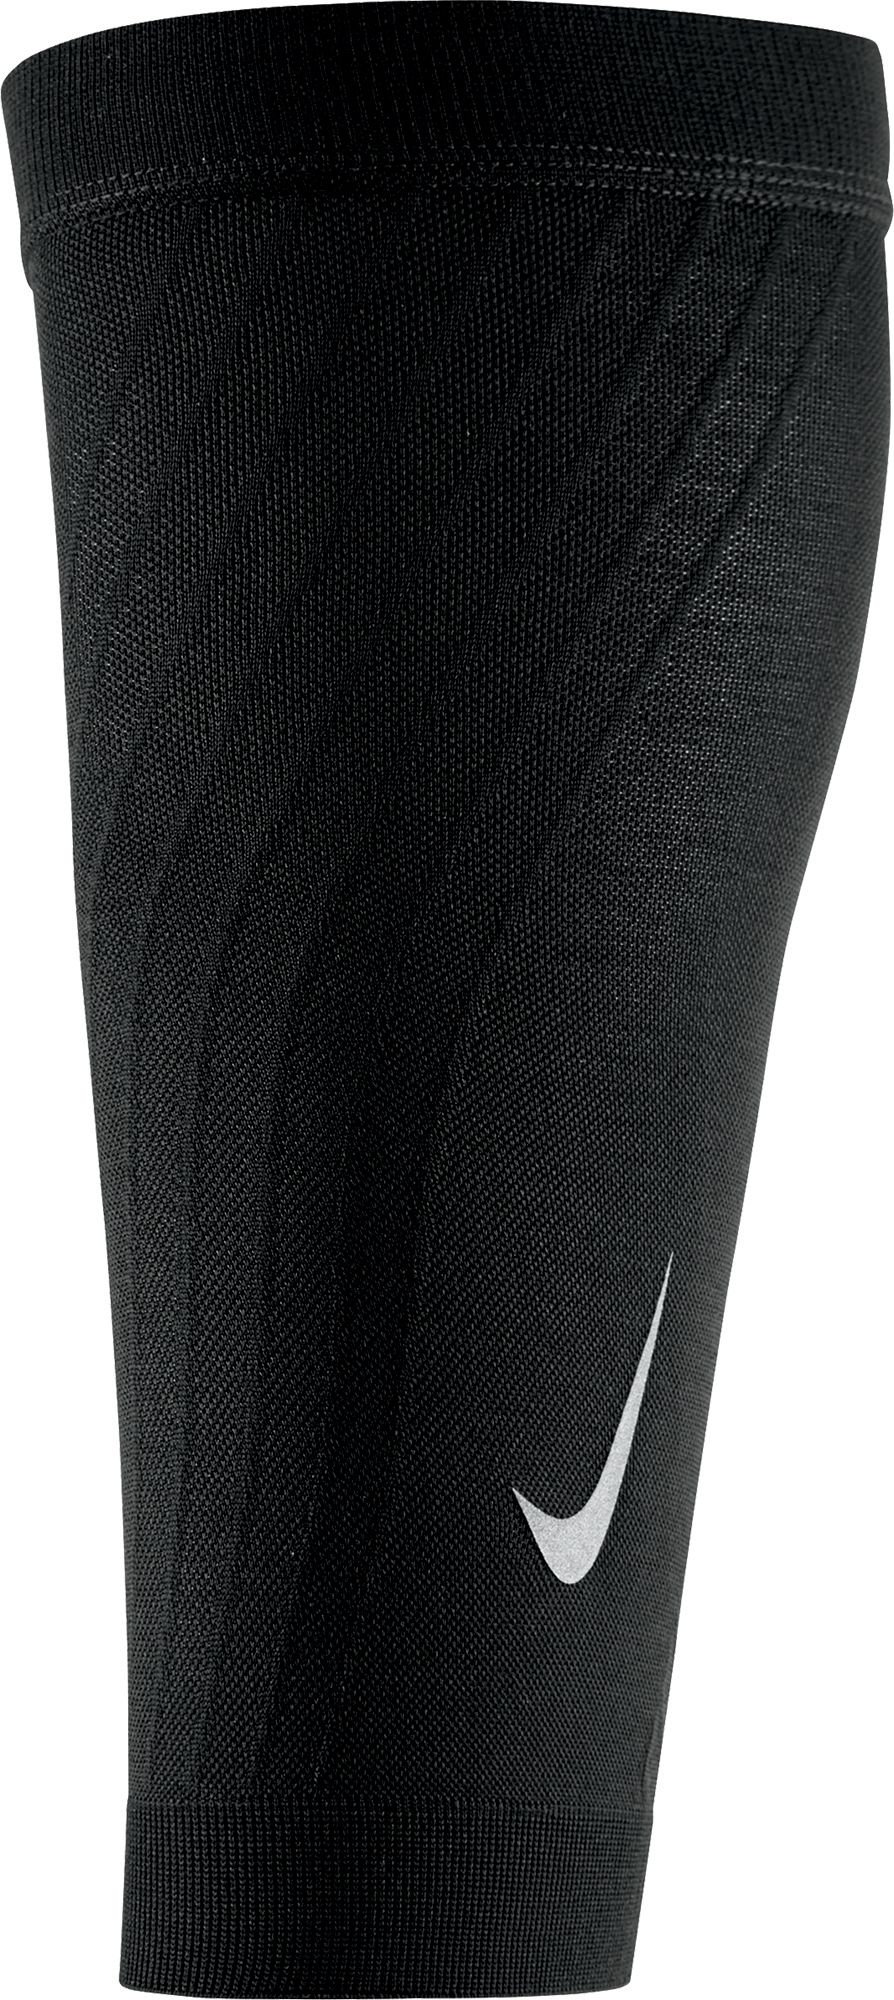 Nike Zoned Support Calf Sleeves | DICK 